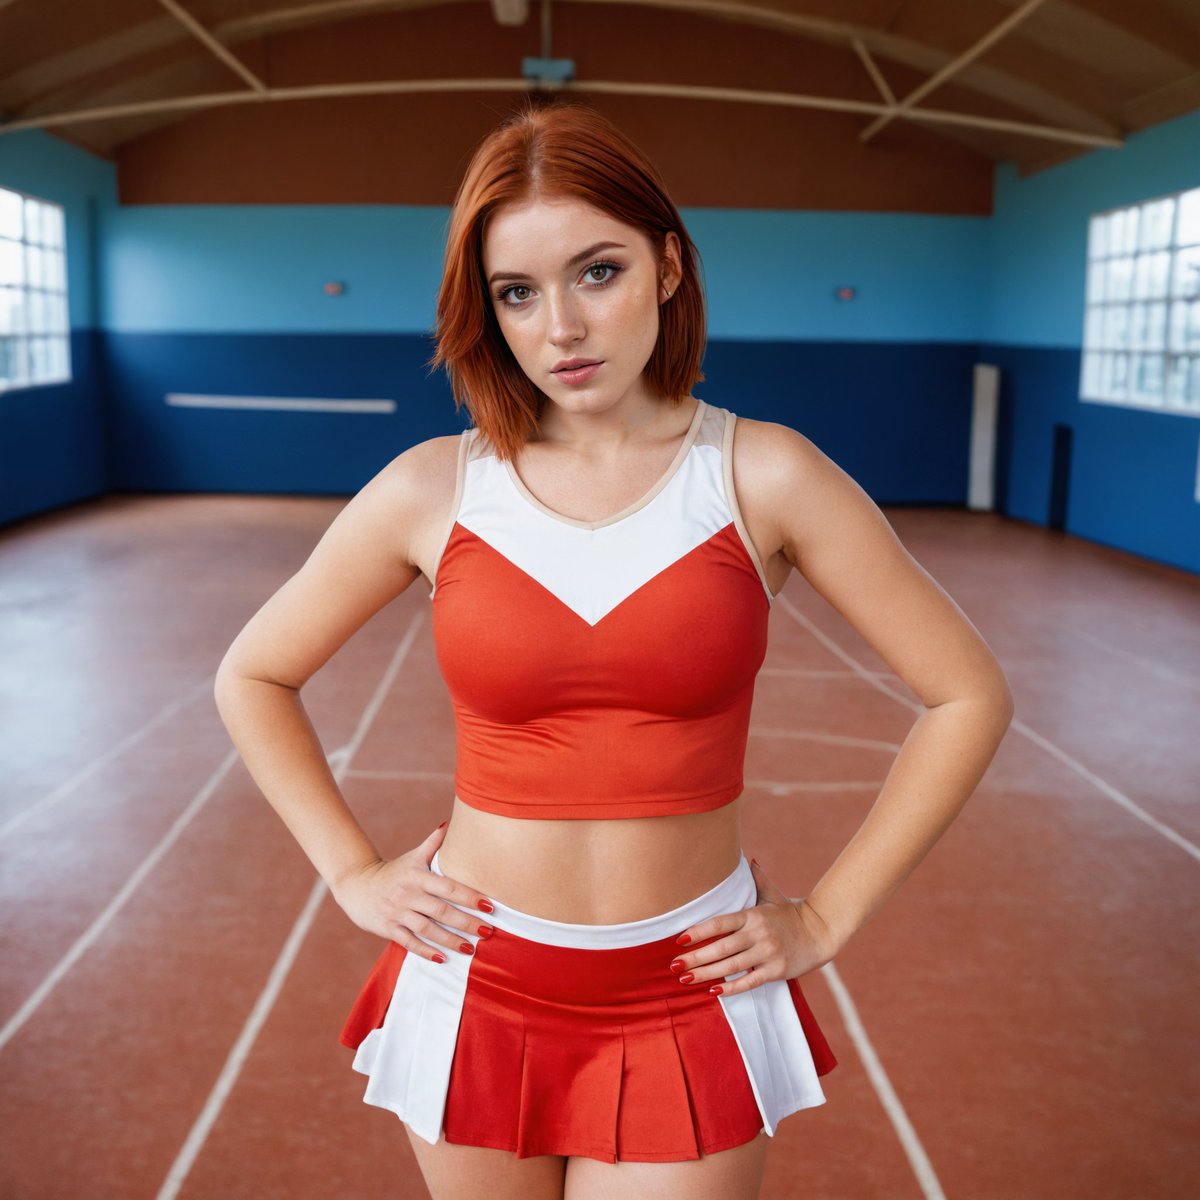 Let's go! 🥳 #redhead #ginger #cheerleader #redhead #beauty #model #aigirl #aimodel #sport #outfit